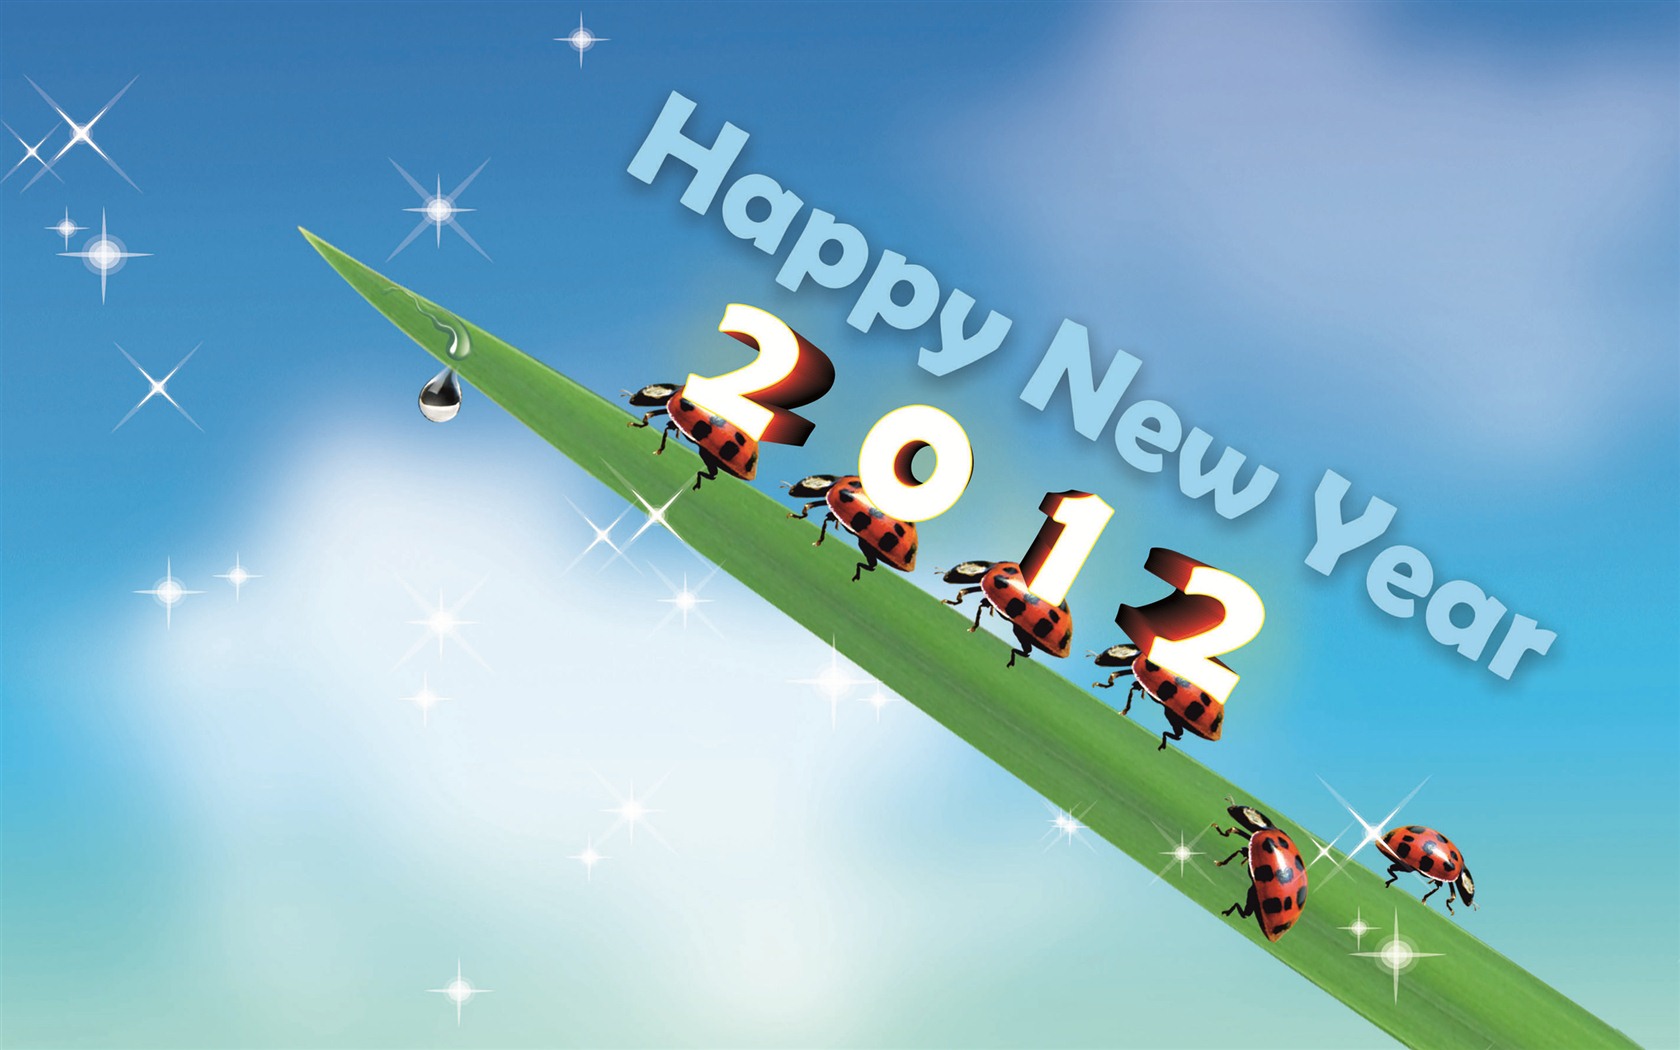 2012 New Year wallpapers (2) #8 - 1680x1050